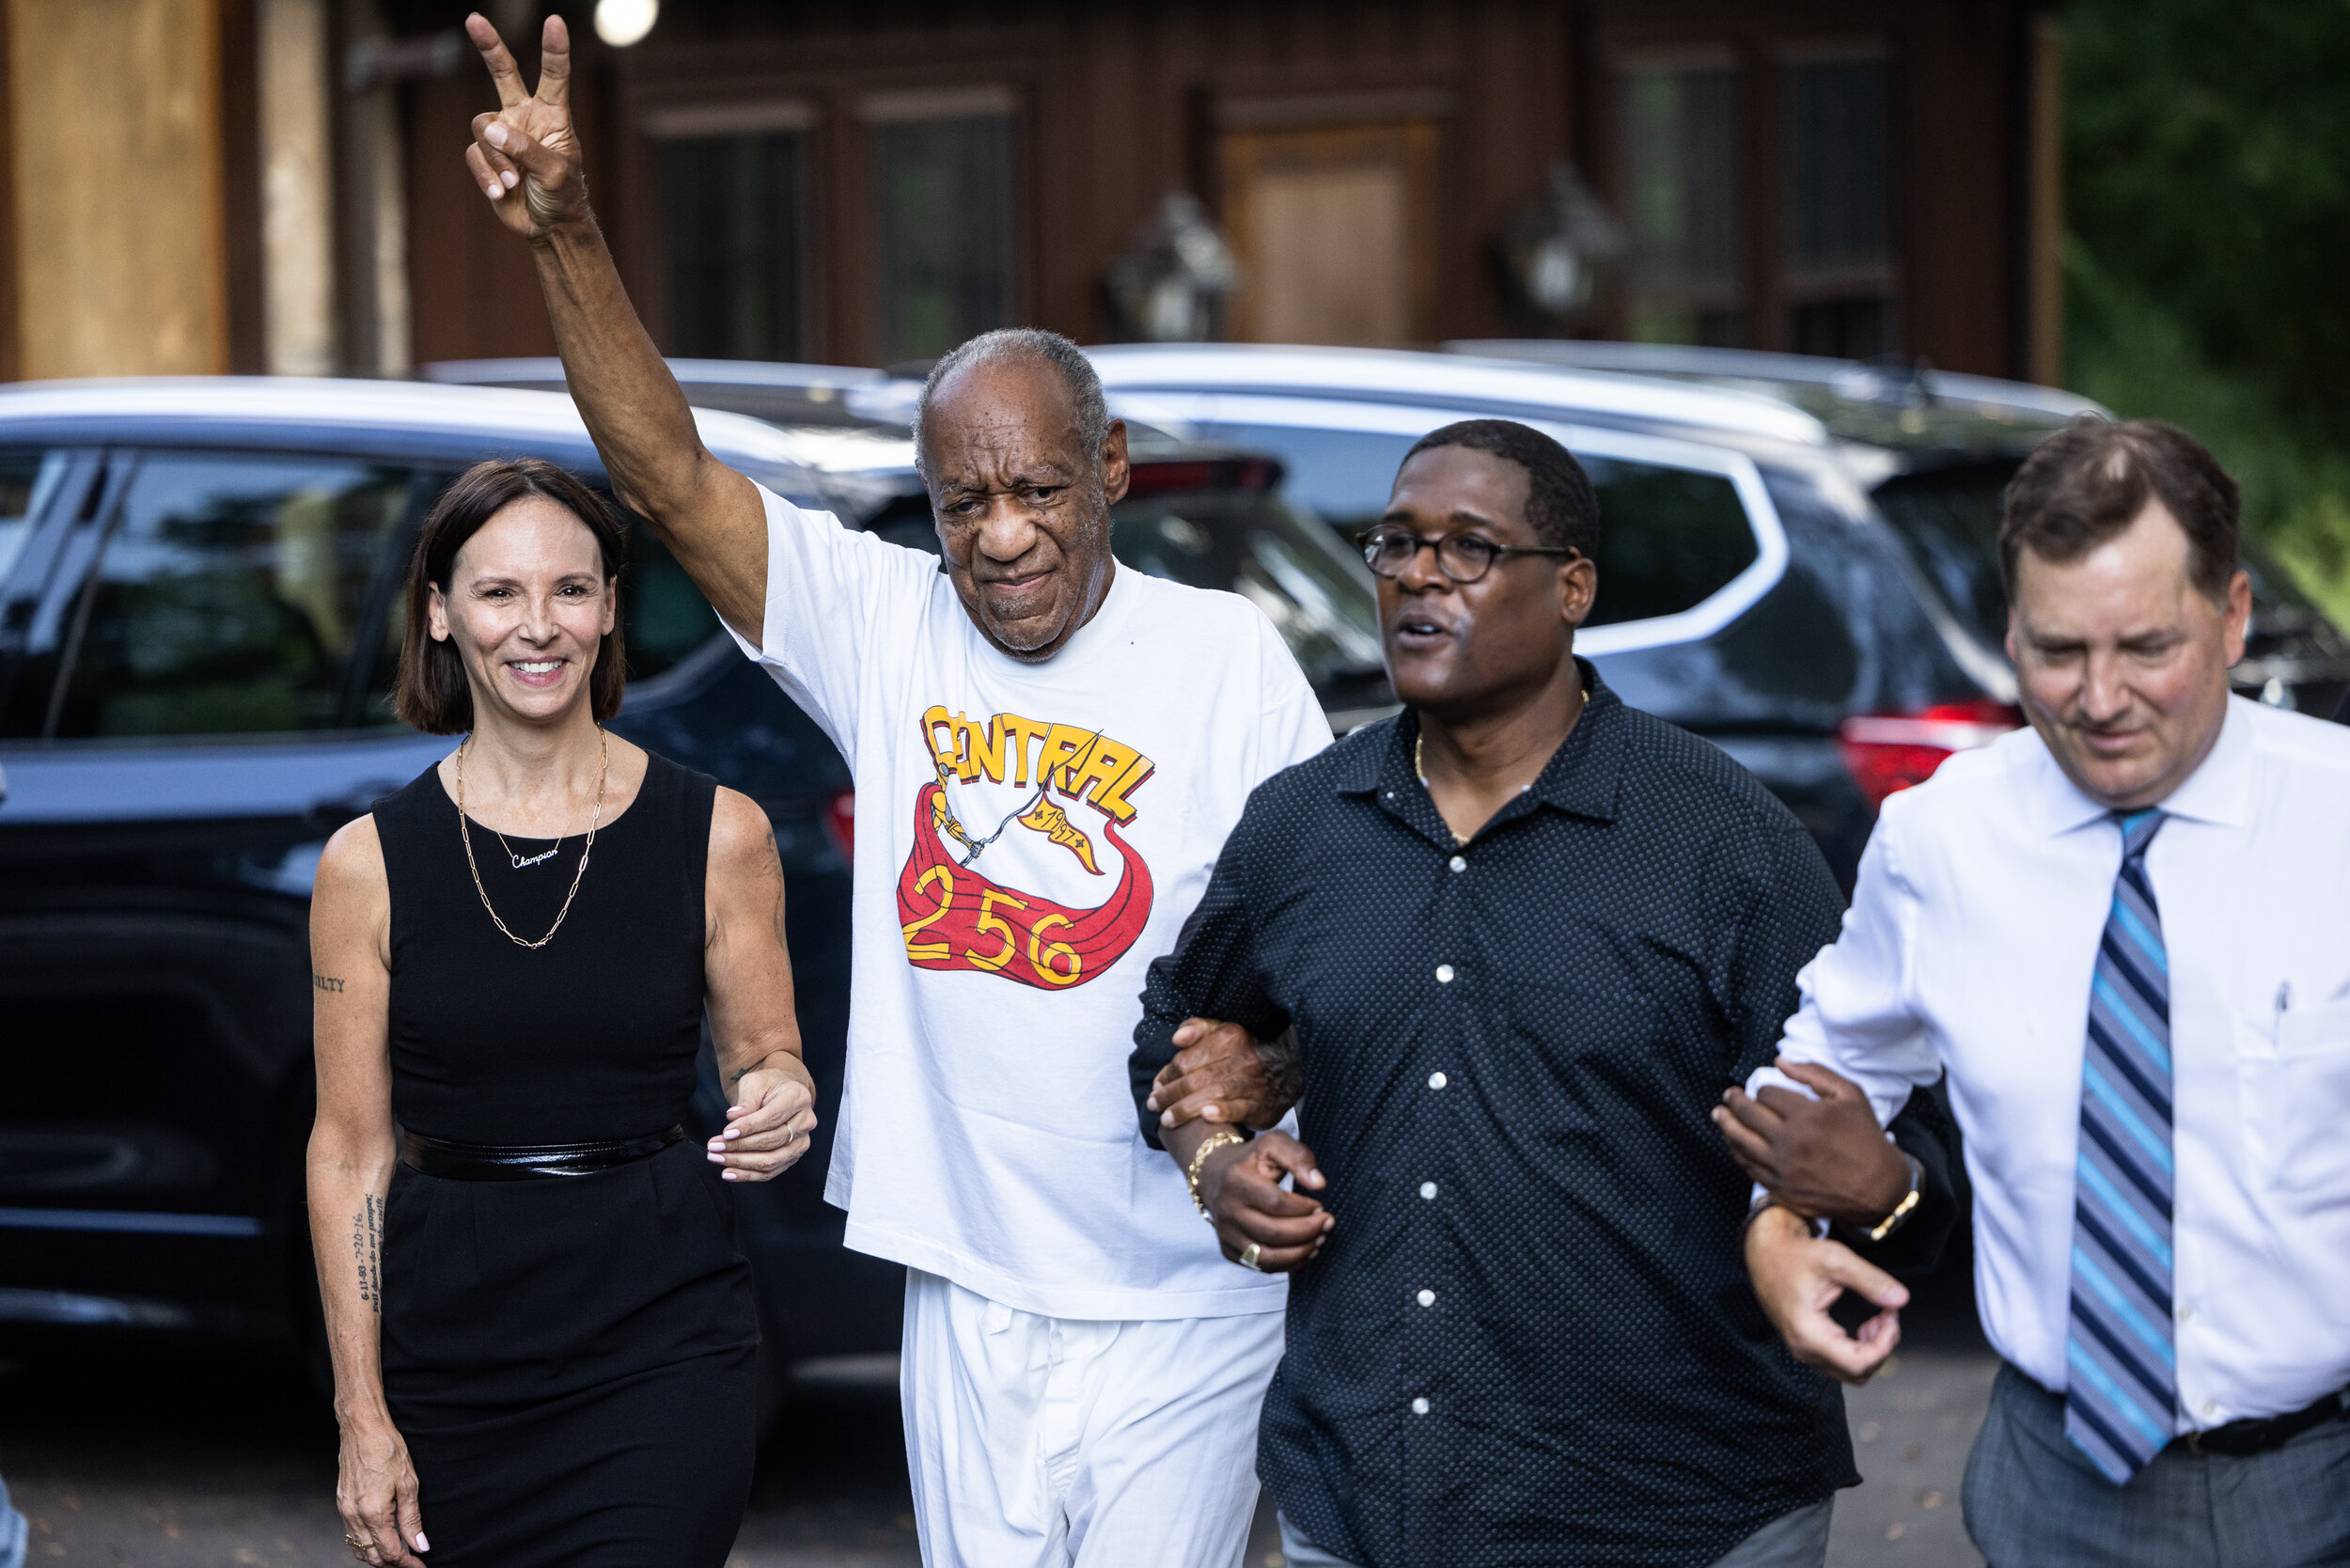  Disgraced actor Bill Cosby makes an appearance outside his home after being released from prison shortly after the Pennsylvania Supreme Court overturned his conviction of sexual assault.  